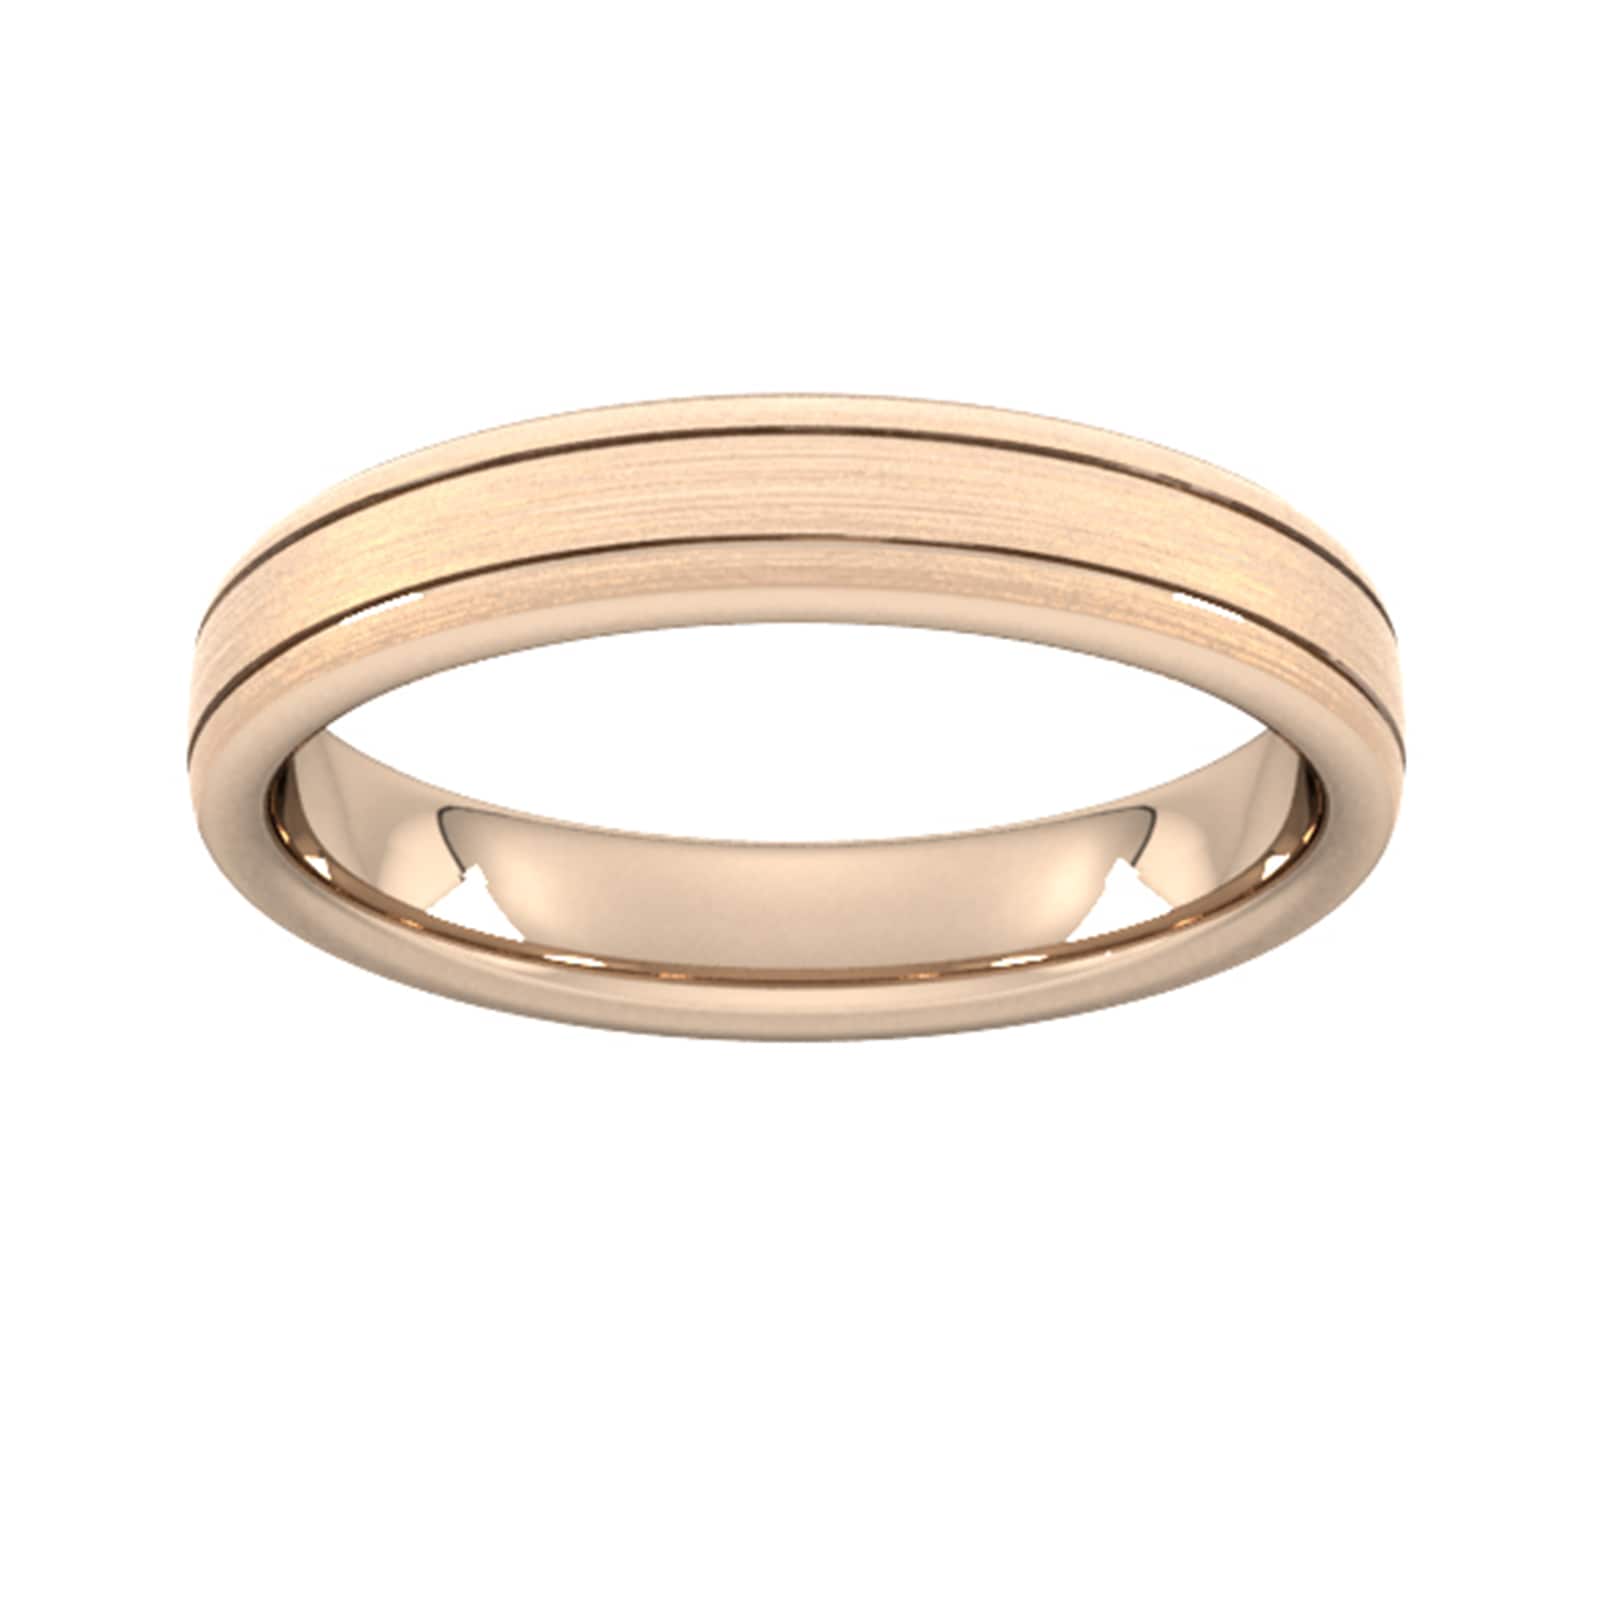 4mm Slight Court Heavy Matt Finish With Double Grooves Wedding Ring In 9 Carat Rose Gold - Ring Size R